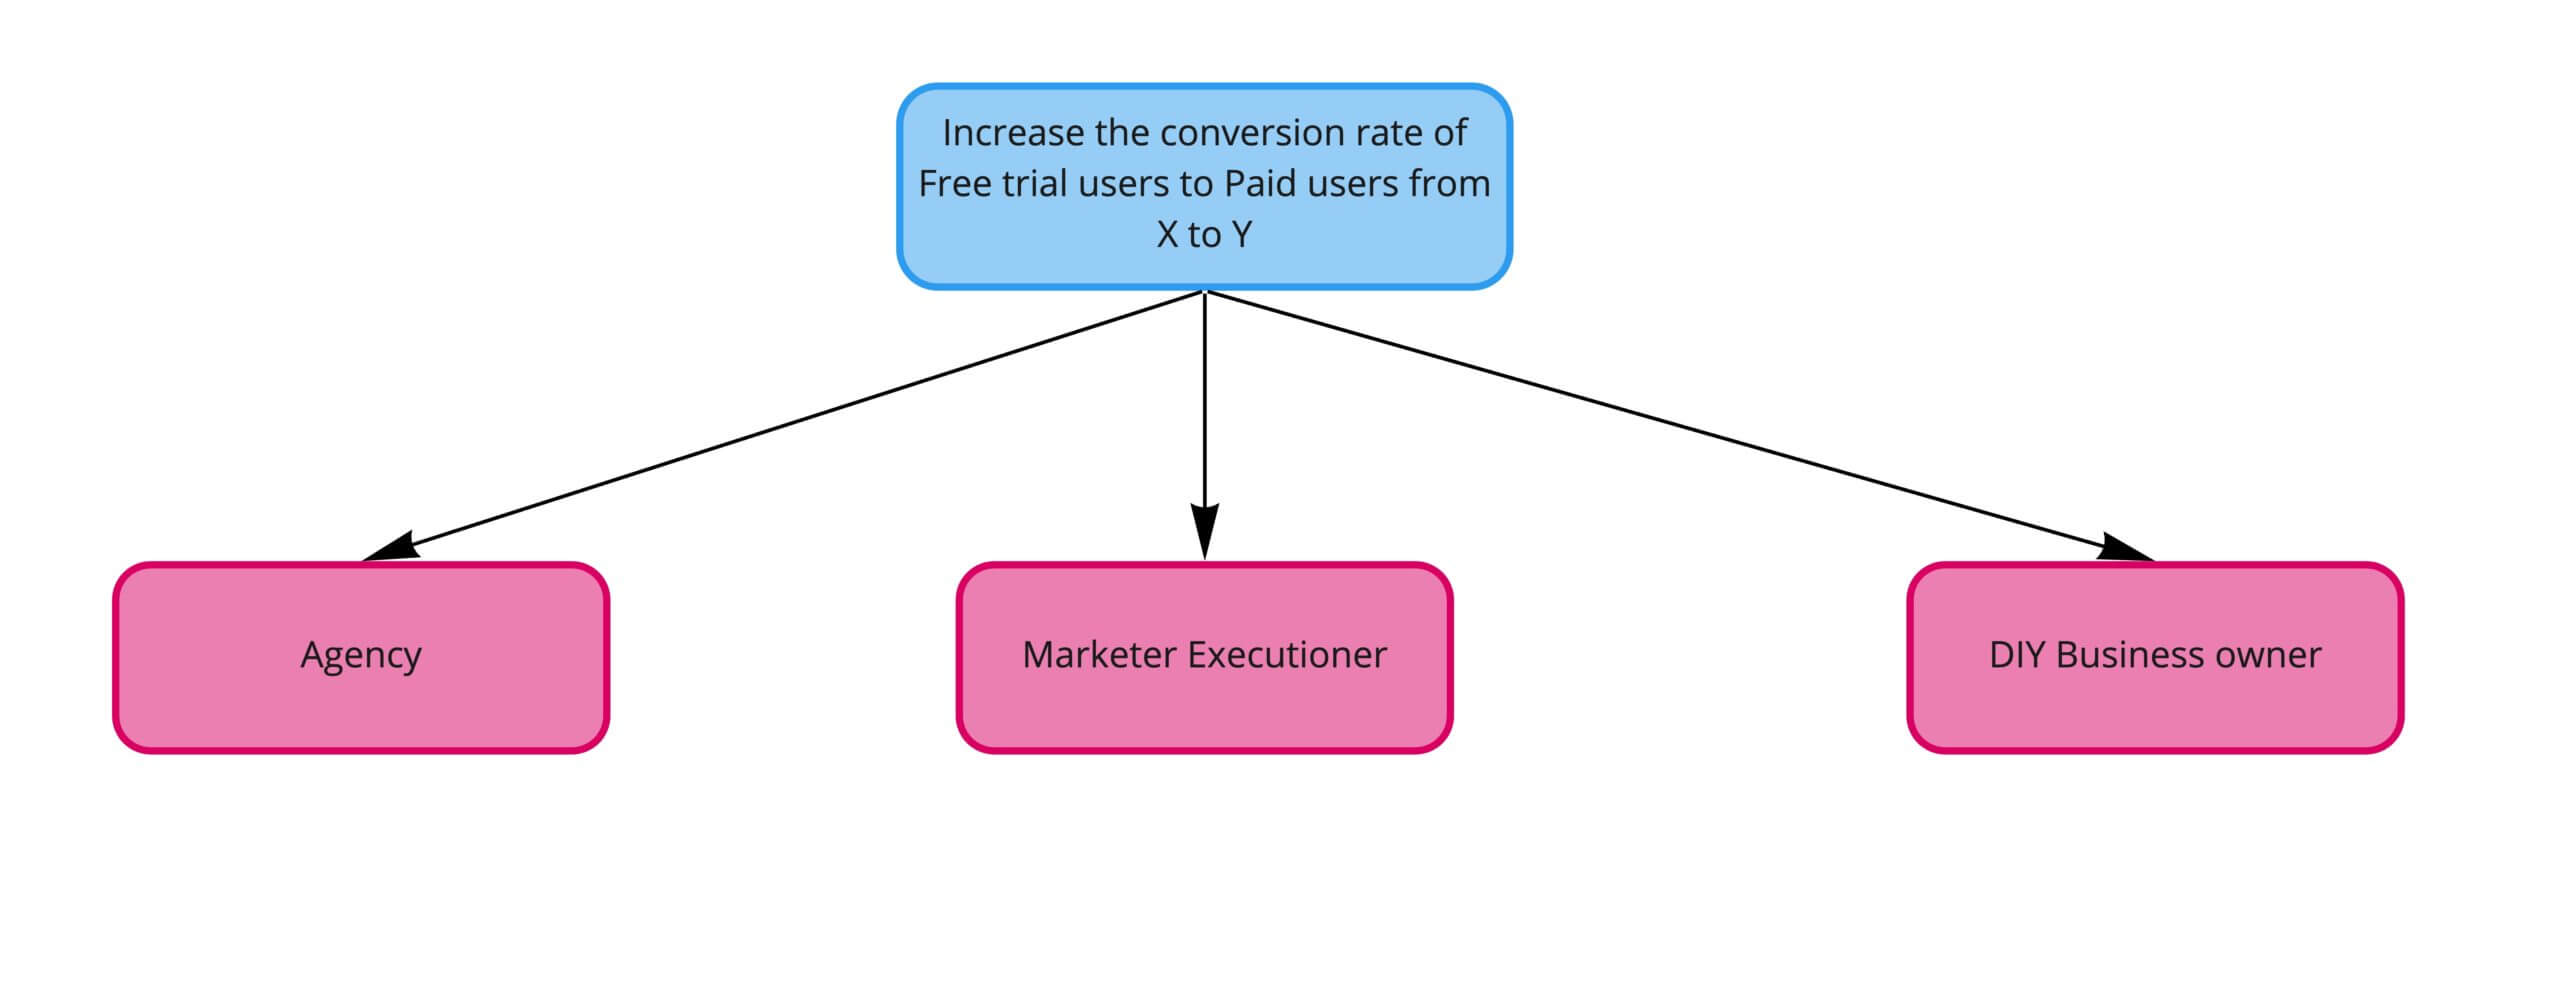 A simple opportunity solution tree diagram. At the top, the outcome reads, "Increase the conversion rate of free trial users to paid users from X to Y." This branches into three different customer groups: agency, marketer executioner, and DIY business owner.